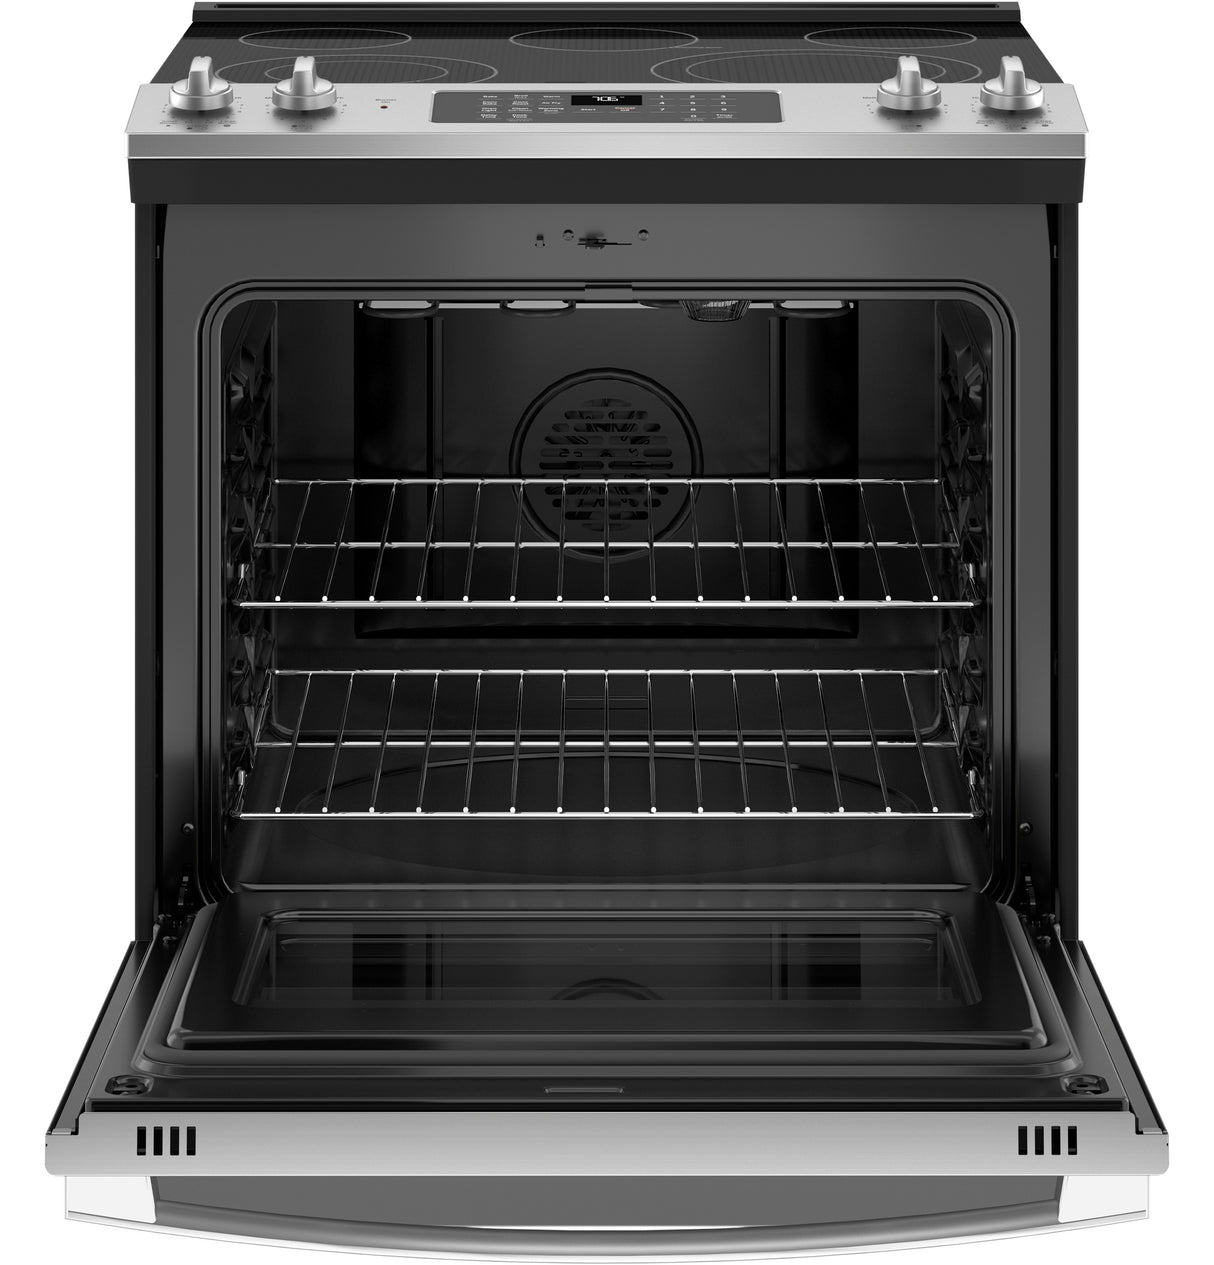 GE(R) 30" Slide-In Electric Convection Range with No Preheat Air Fry - (JS760SPSS)